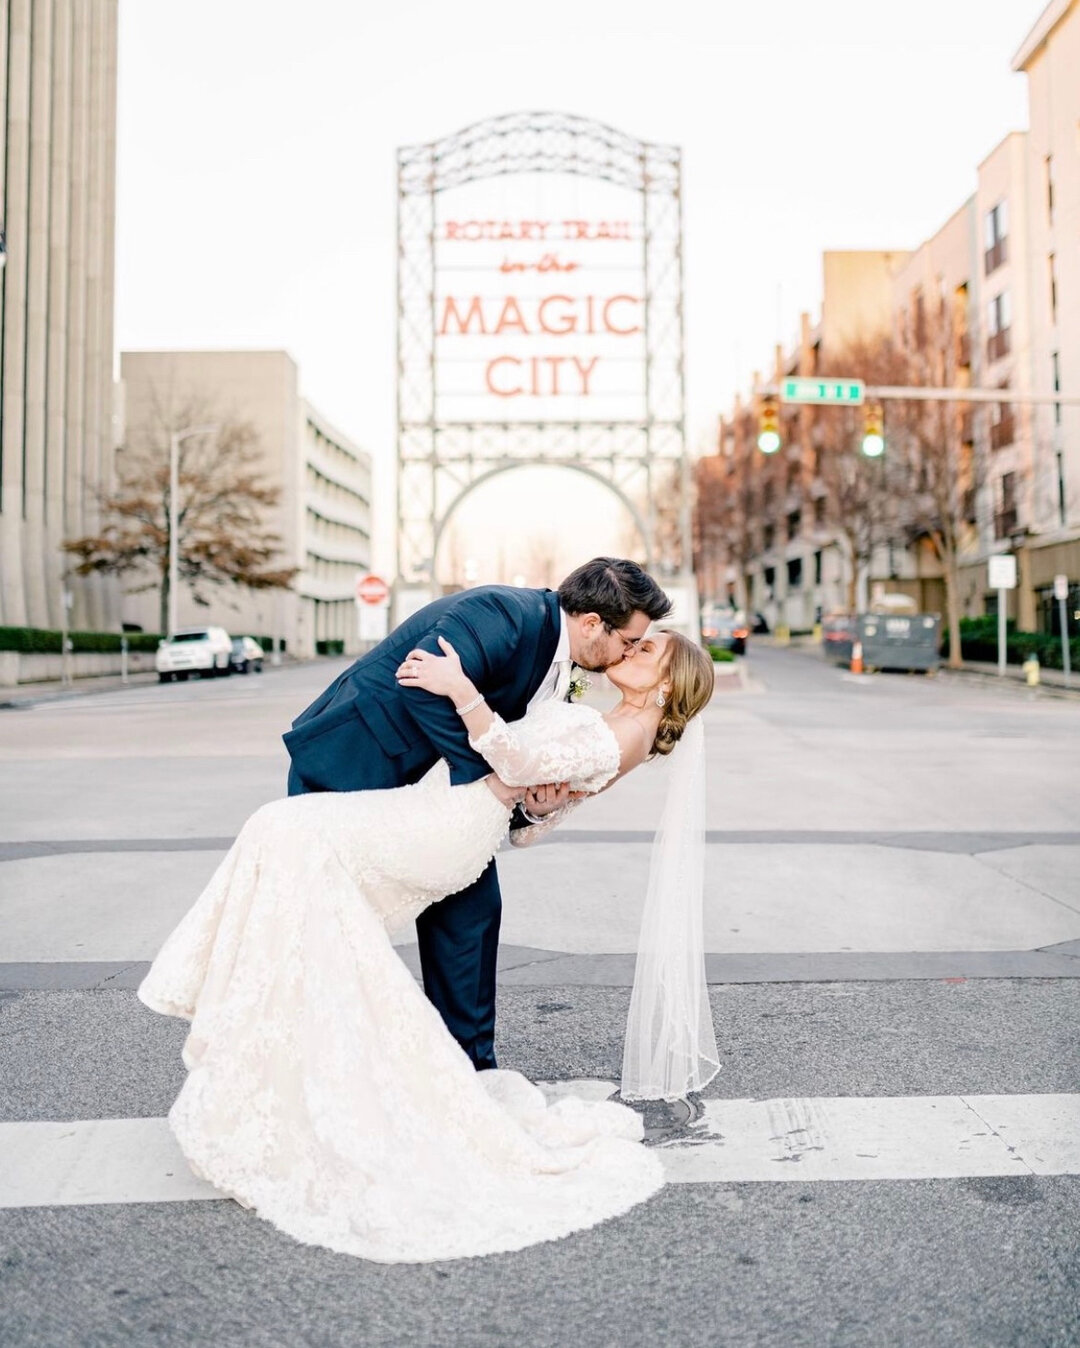 Just a little Monday wedding magic in the Magic City🤍🌇​​​​​​​​
​​​​​​​​
Photo of beautiful @hope_thompson1 and @rossdthompson222 by @ericandjamiephoto​​​​​​​​
​​​​​​​​
Vendors:​​​​​​​​
Gown: @annebarge from @bustlegowns​​​​​​​​
Photography: @erican